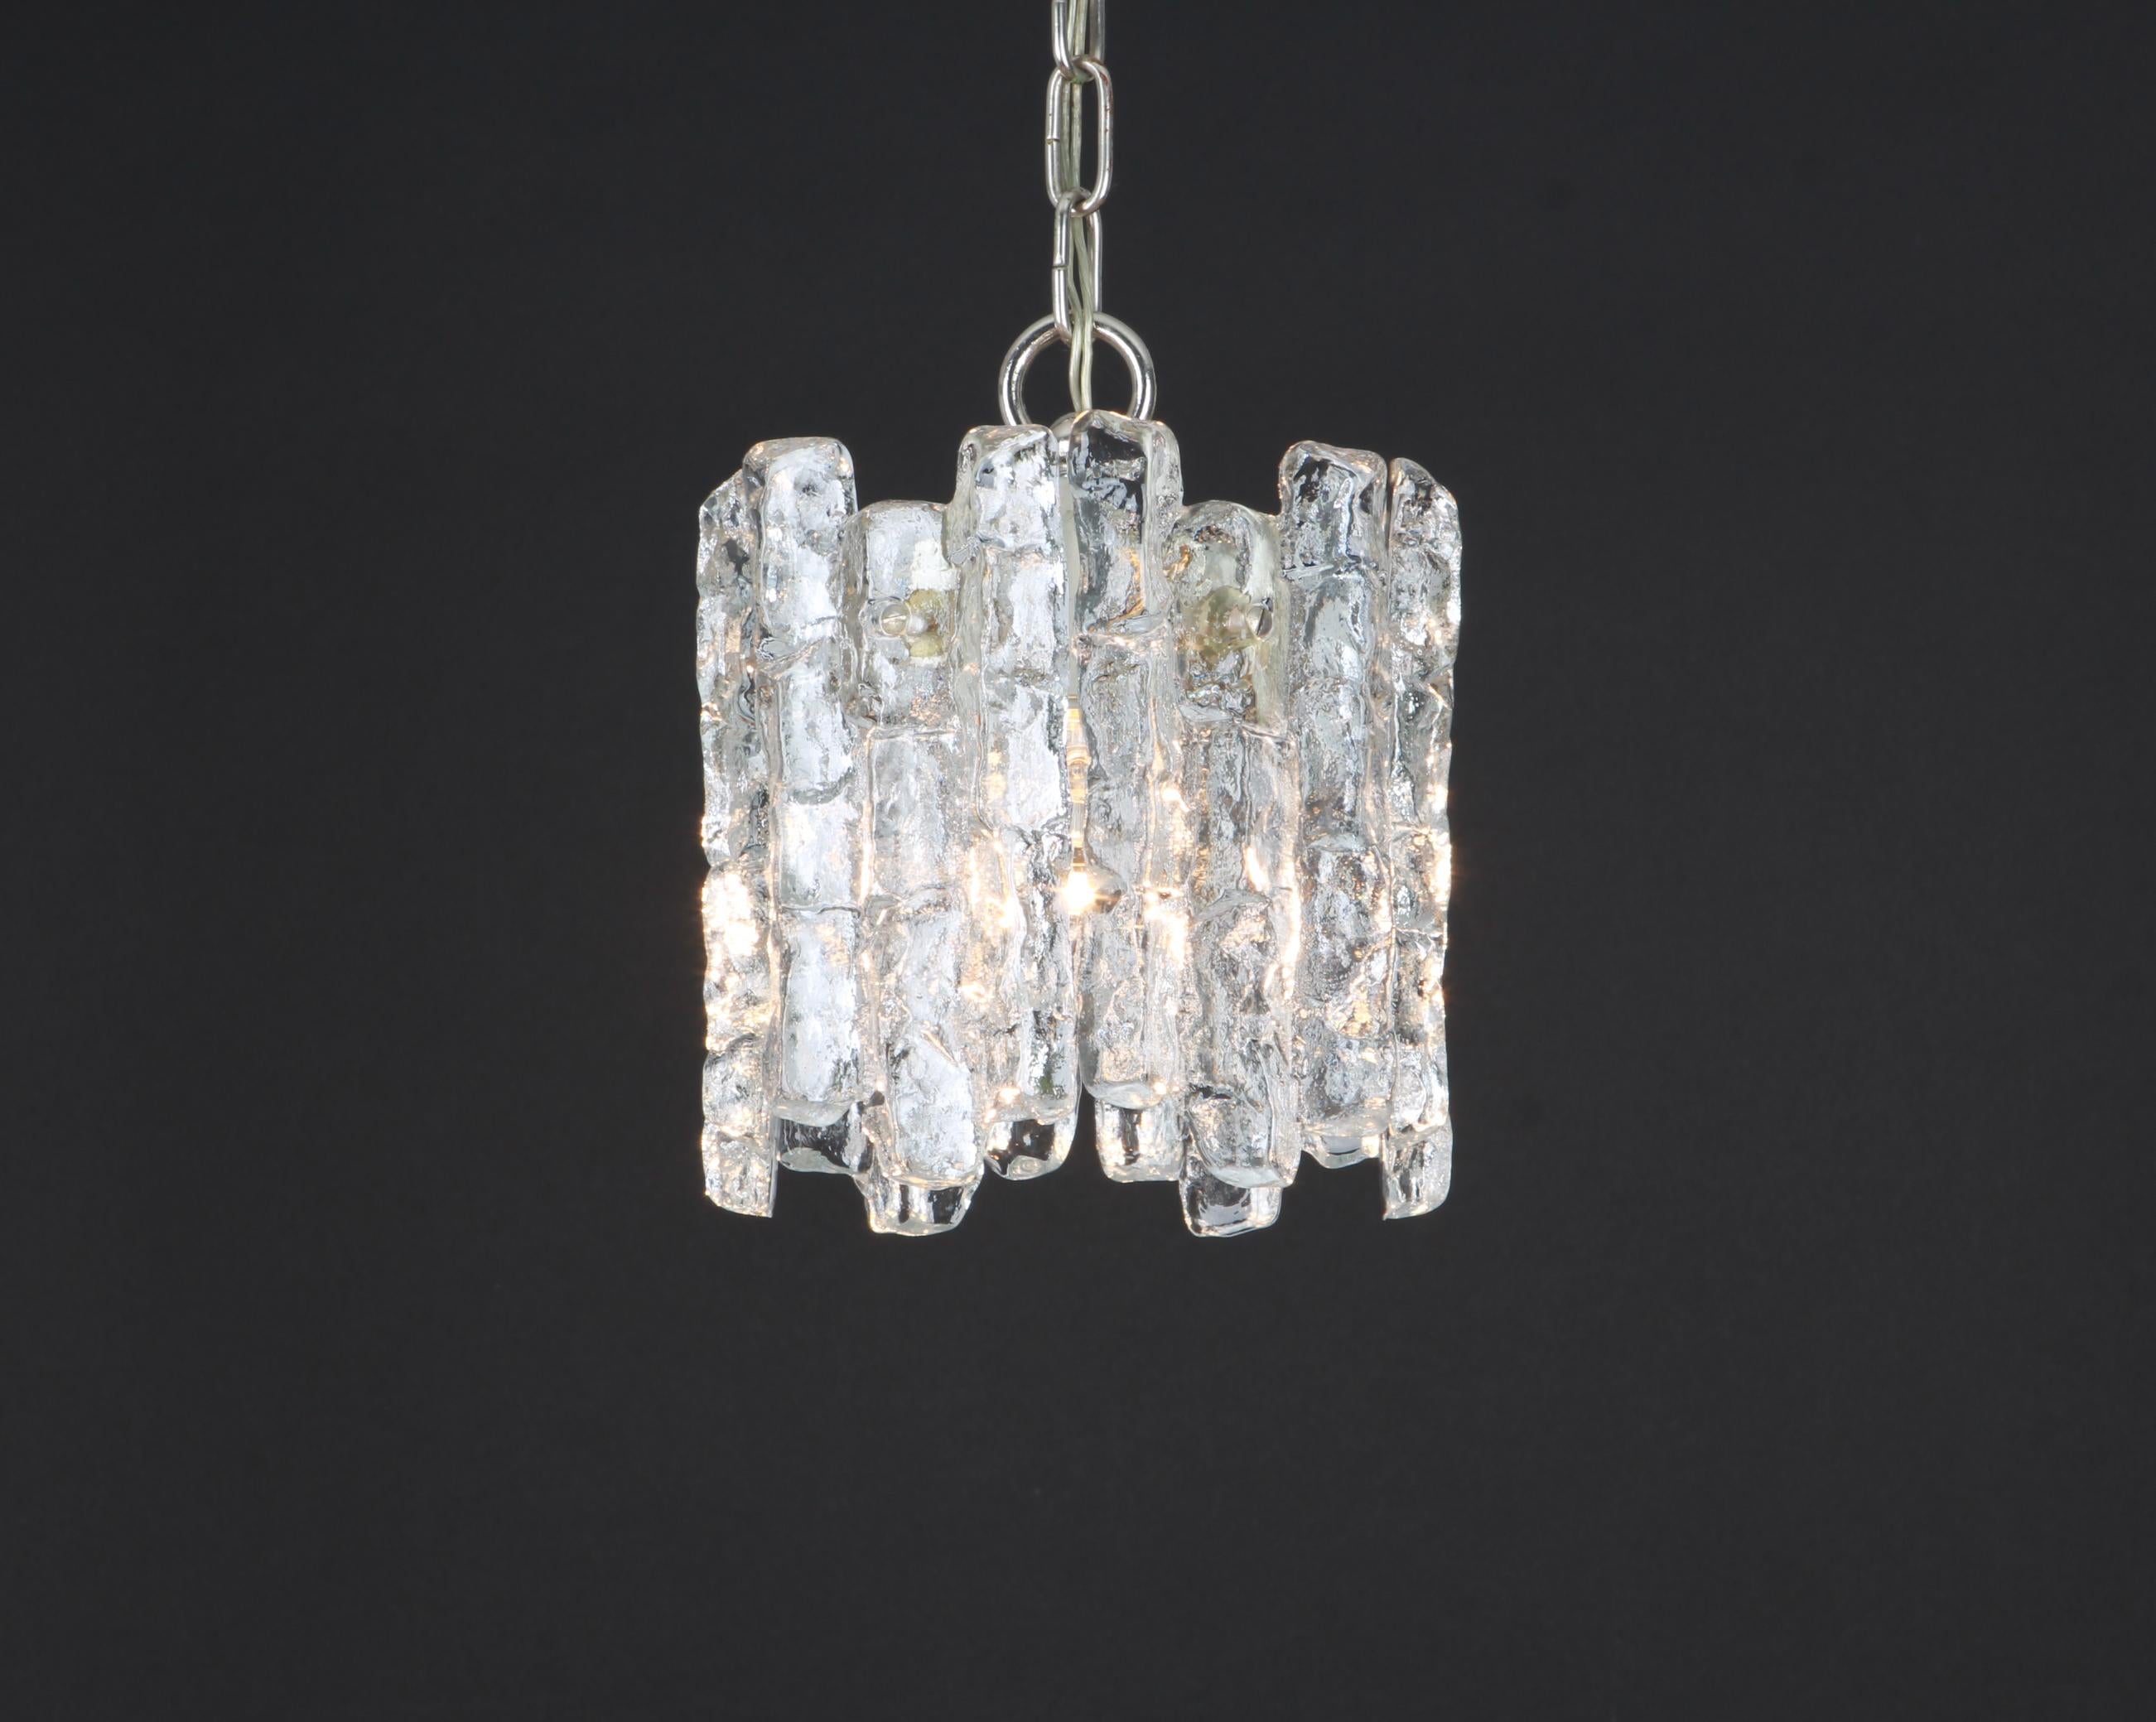 Stunning Murano glass pendants by Kalmar, 1960s
5 structured glasses, beautifully refracting the light very heavy quality.

Heavy quality and in very good condition. Cleaned, well-wired and ready to use. 

The fixture requires one E27 standard